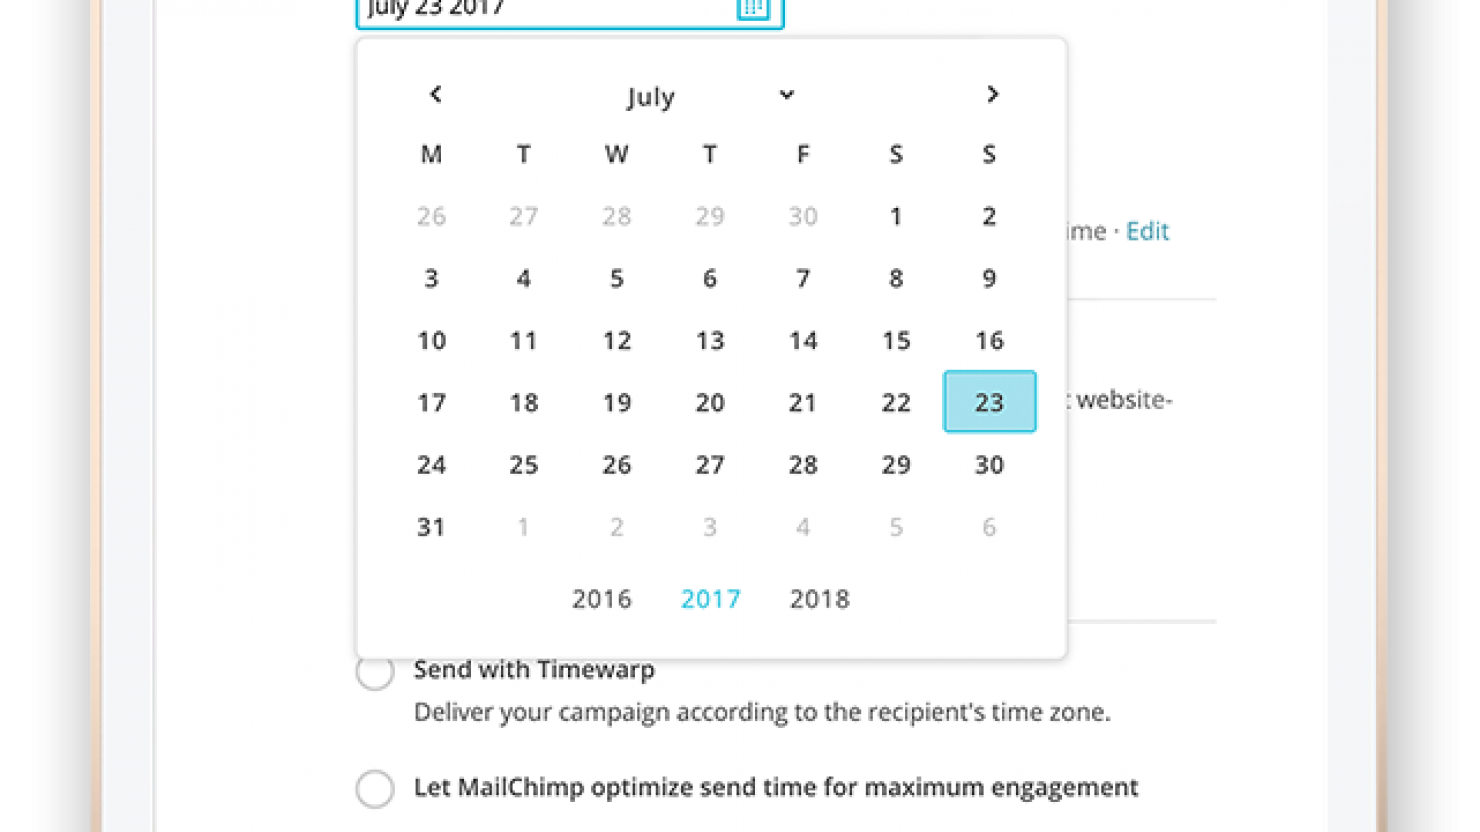 Calendar showing email marketing campaign scheduling